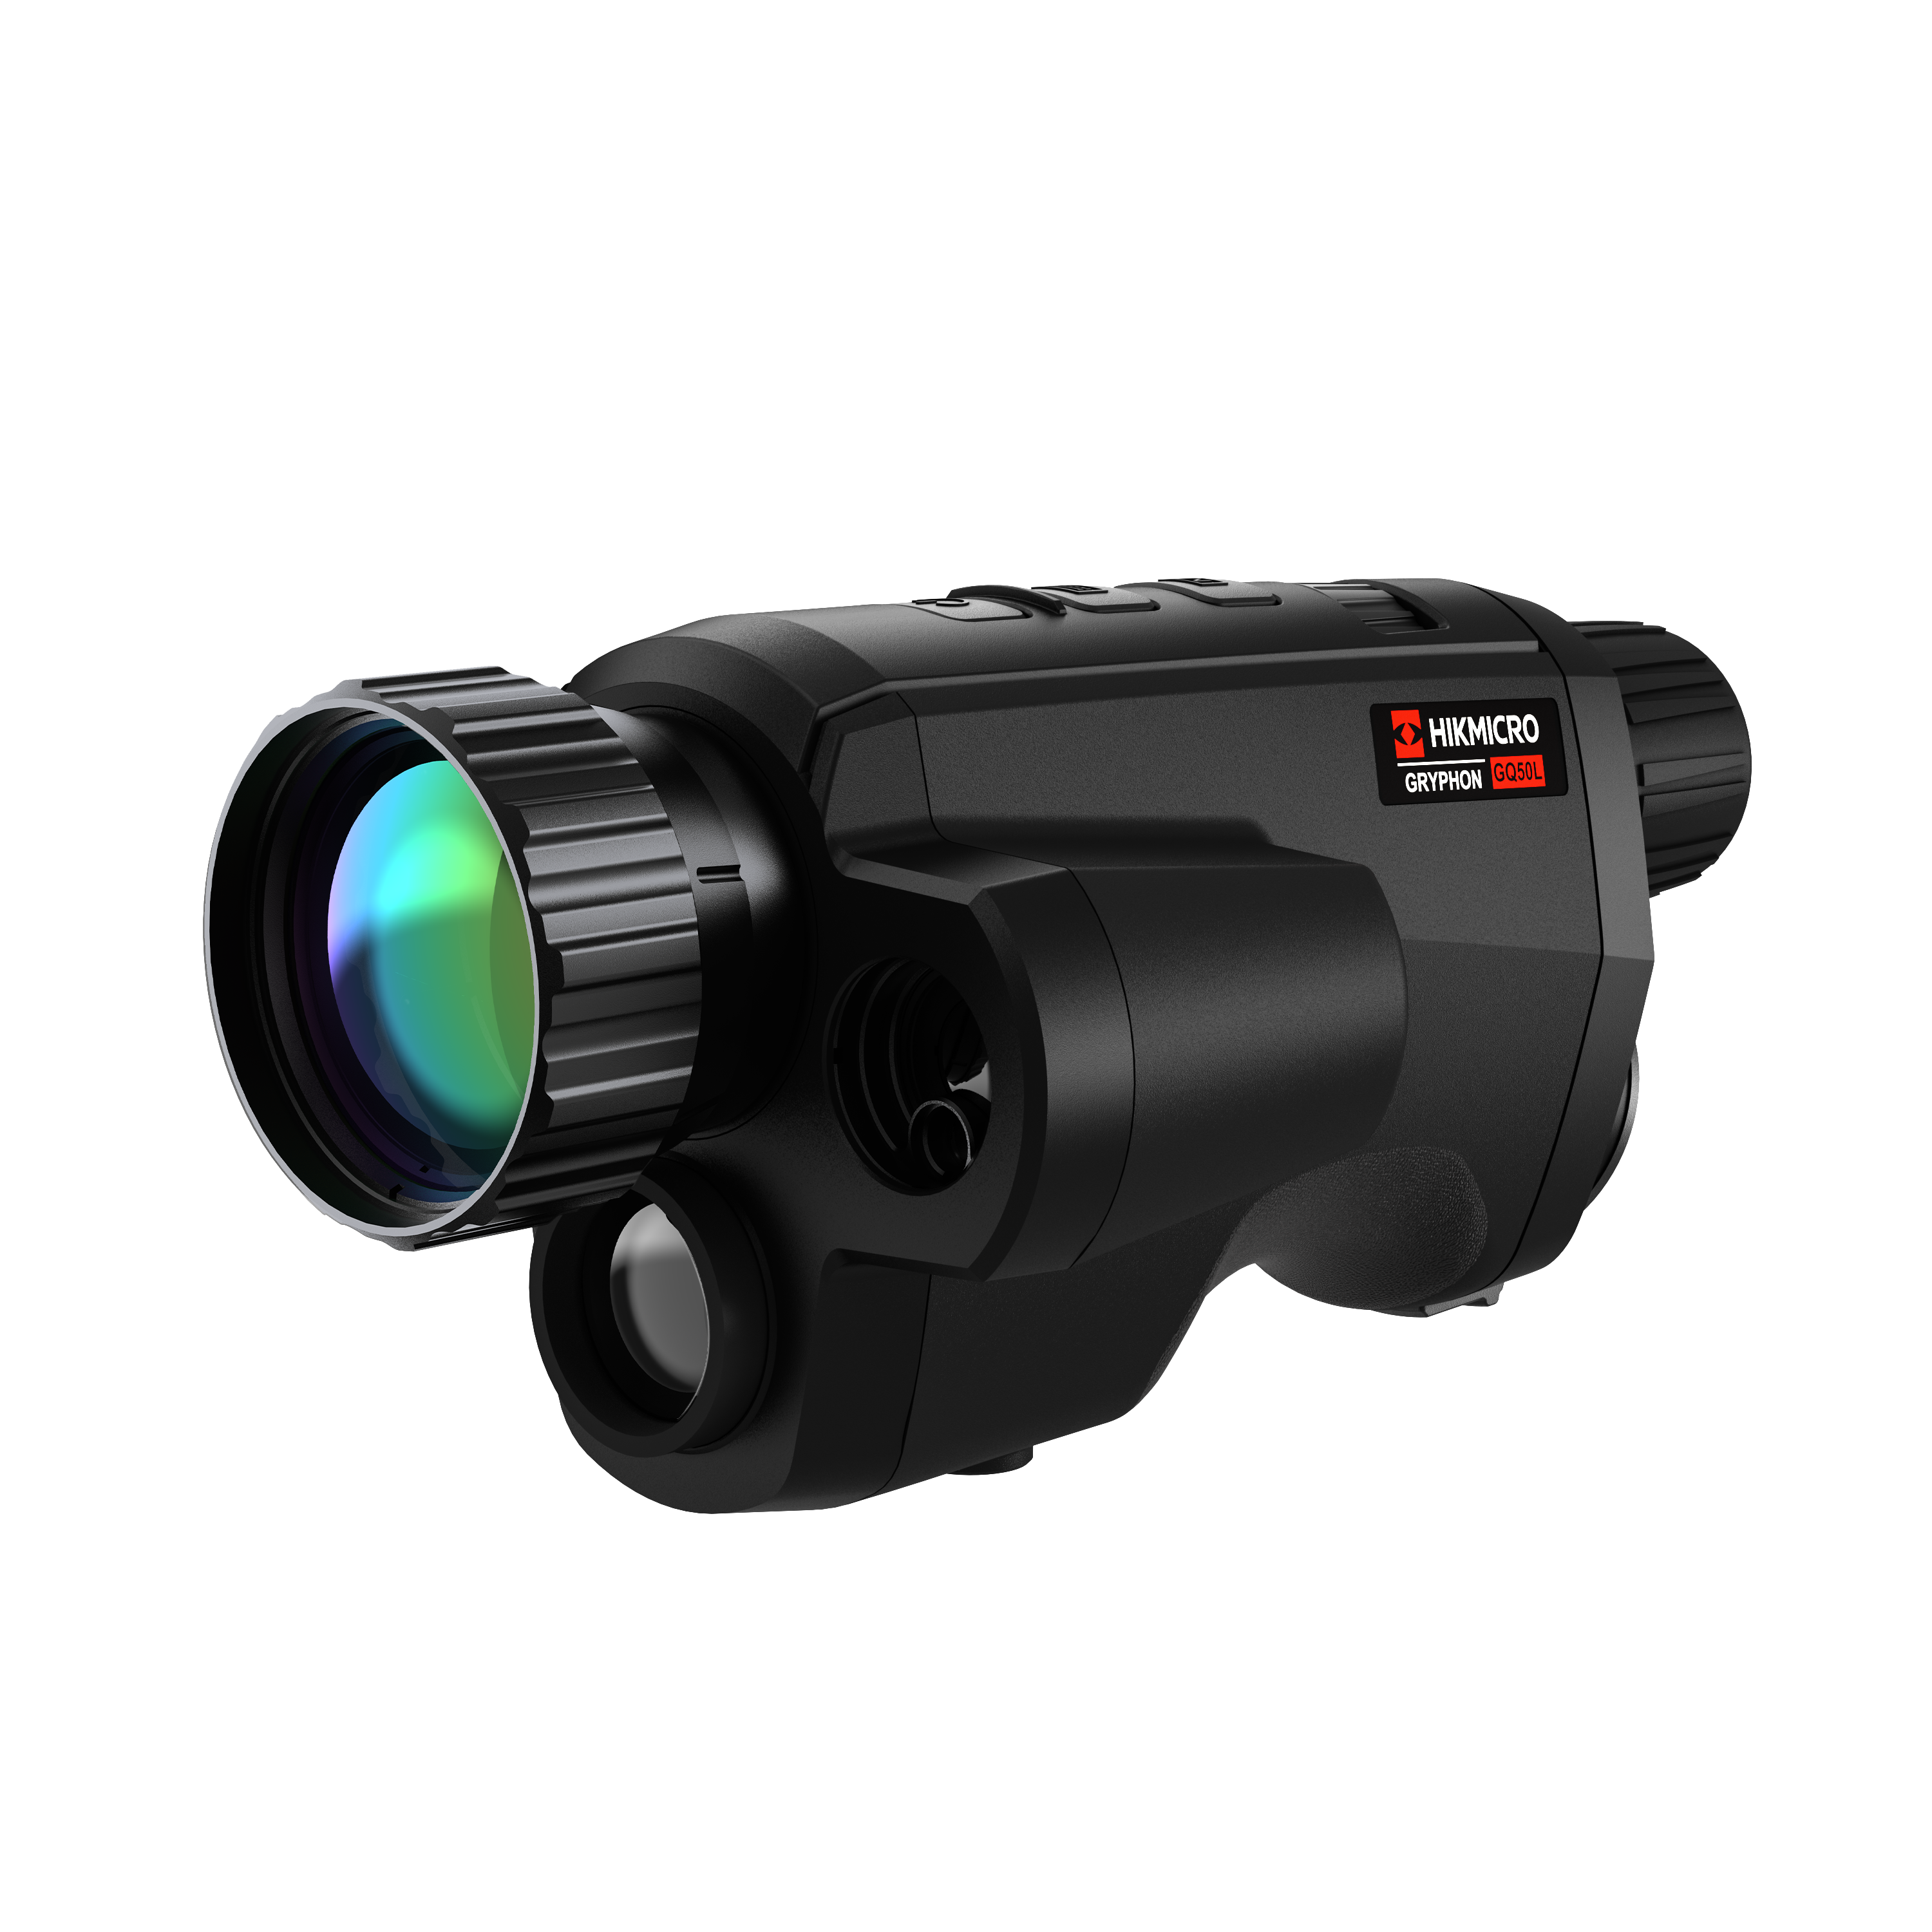 Gryphon Fusion Bispectral Imaging Thermal Monocular